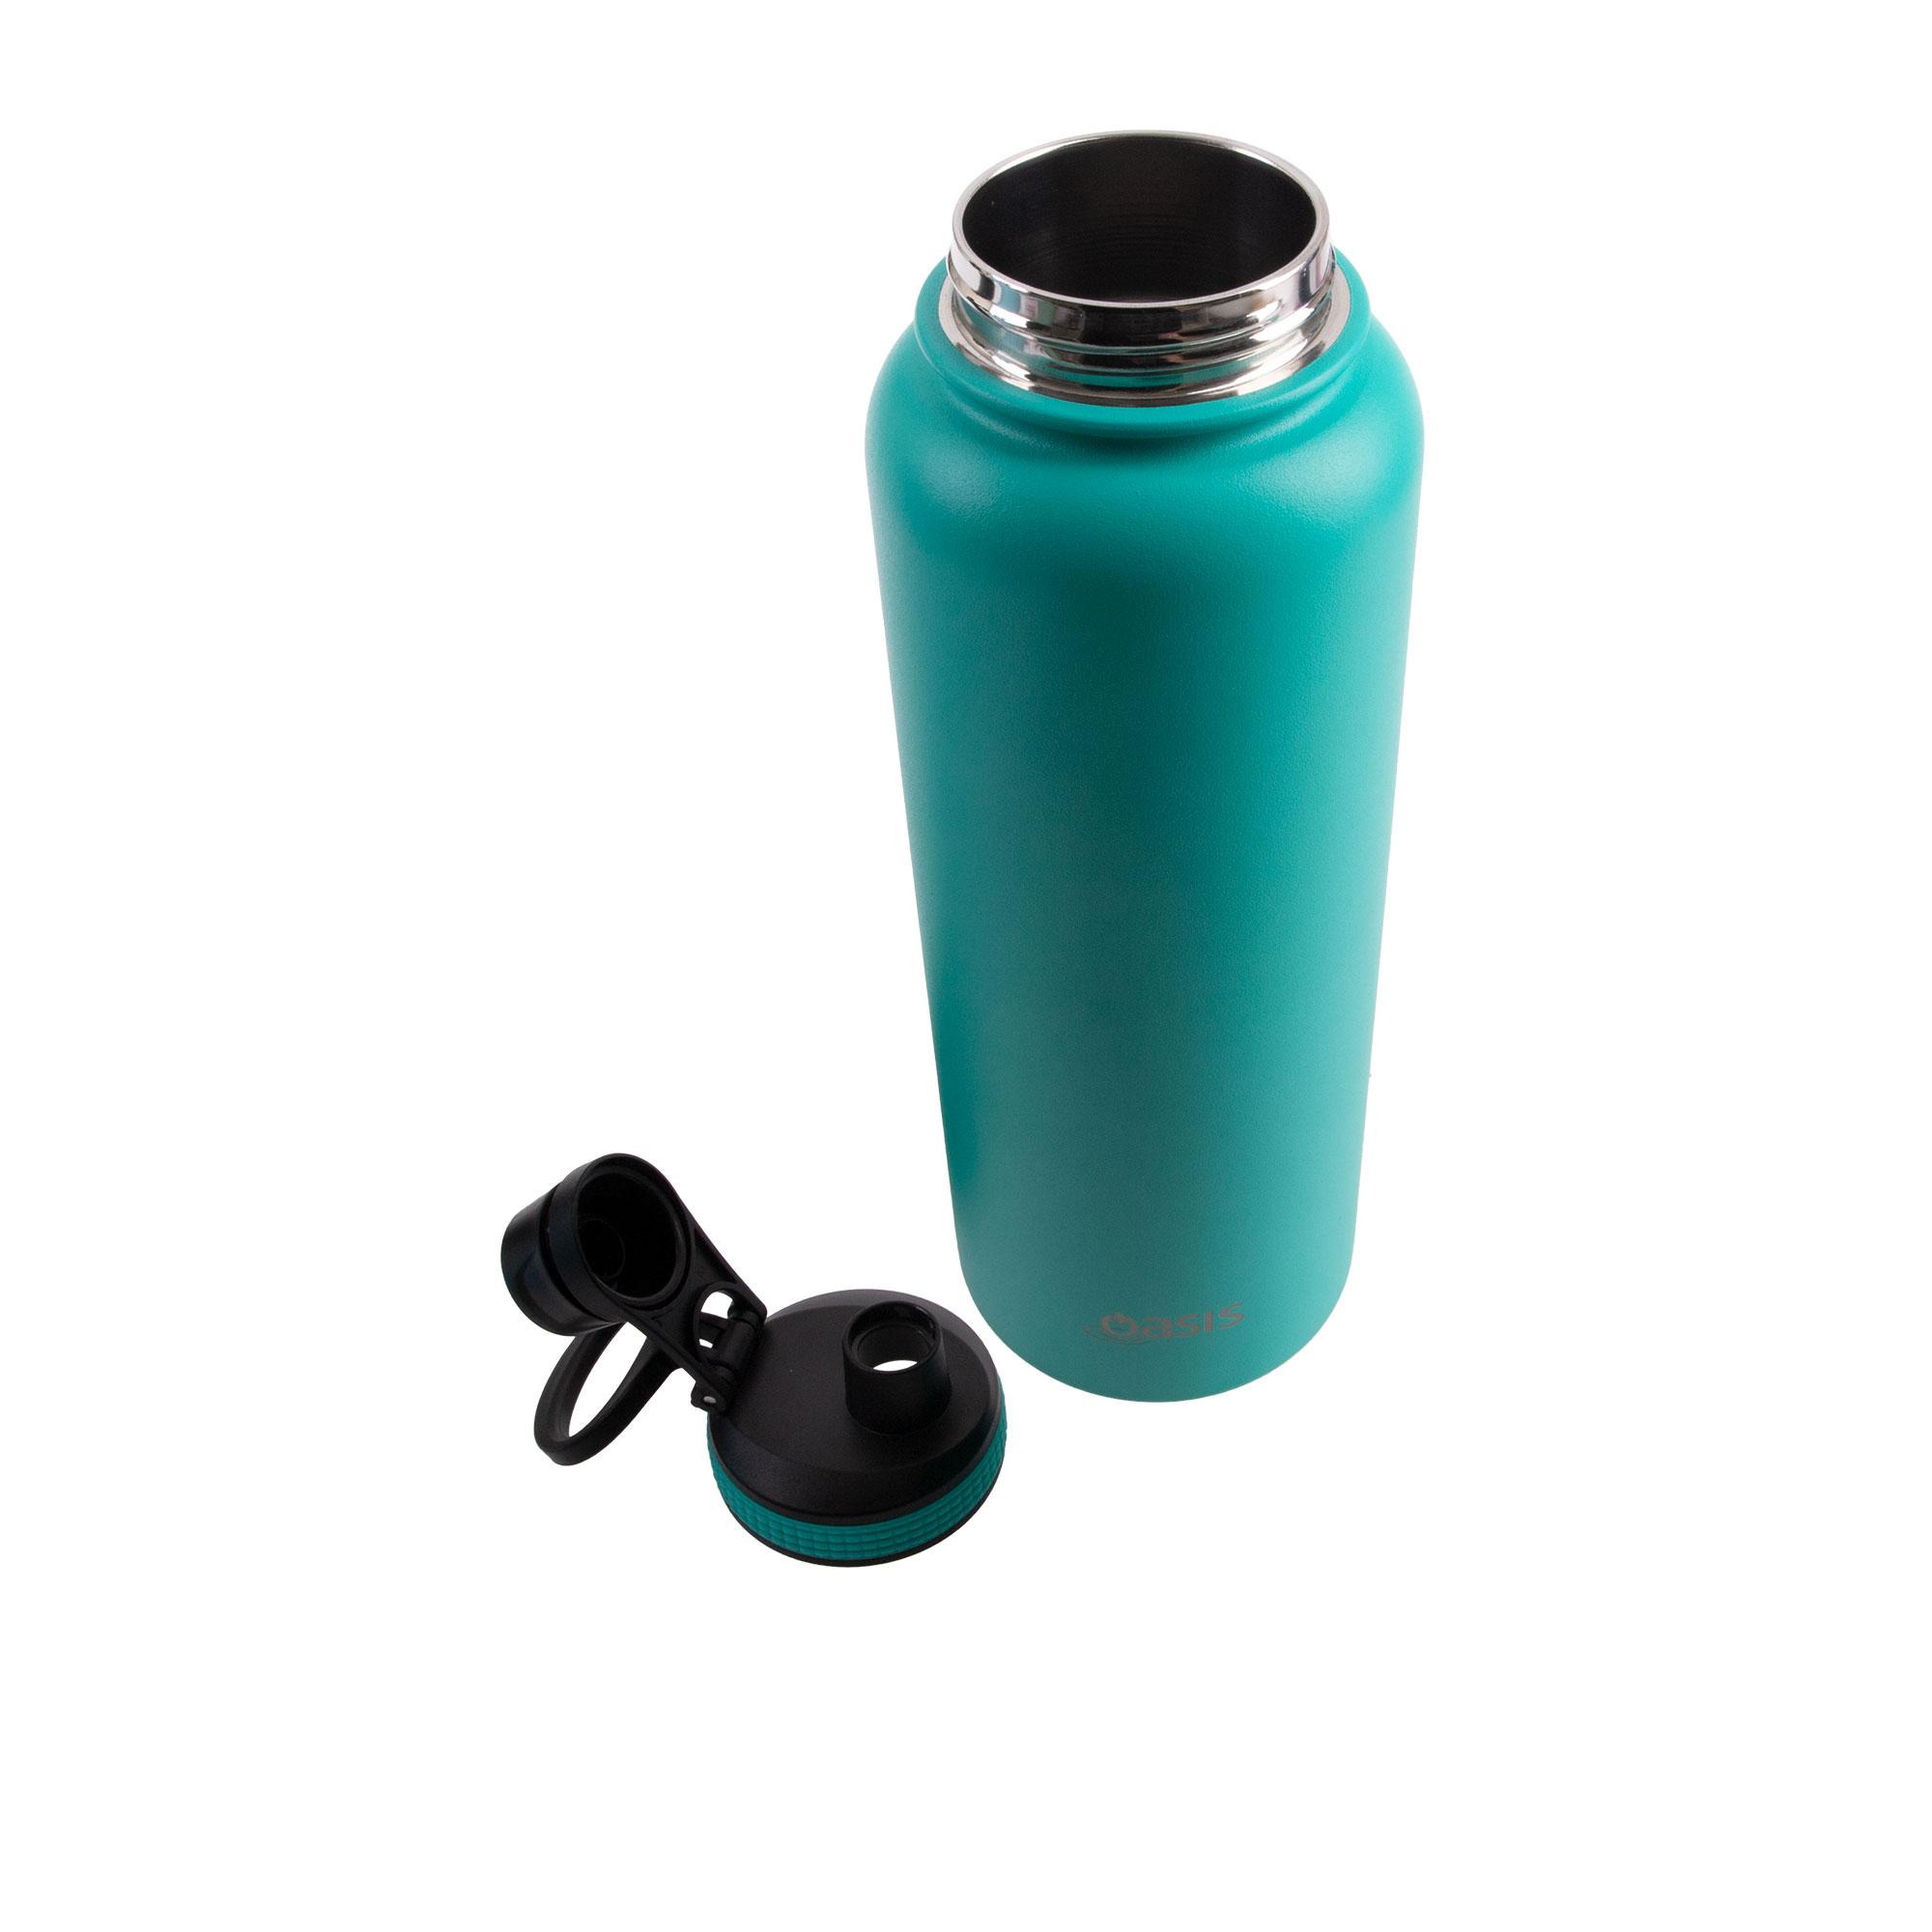 Oasis Challenger Double Wall Insulated Sports Bottle 1.1L Turquoise Image 4